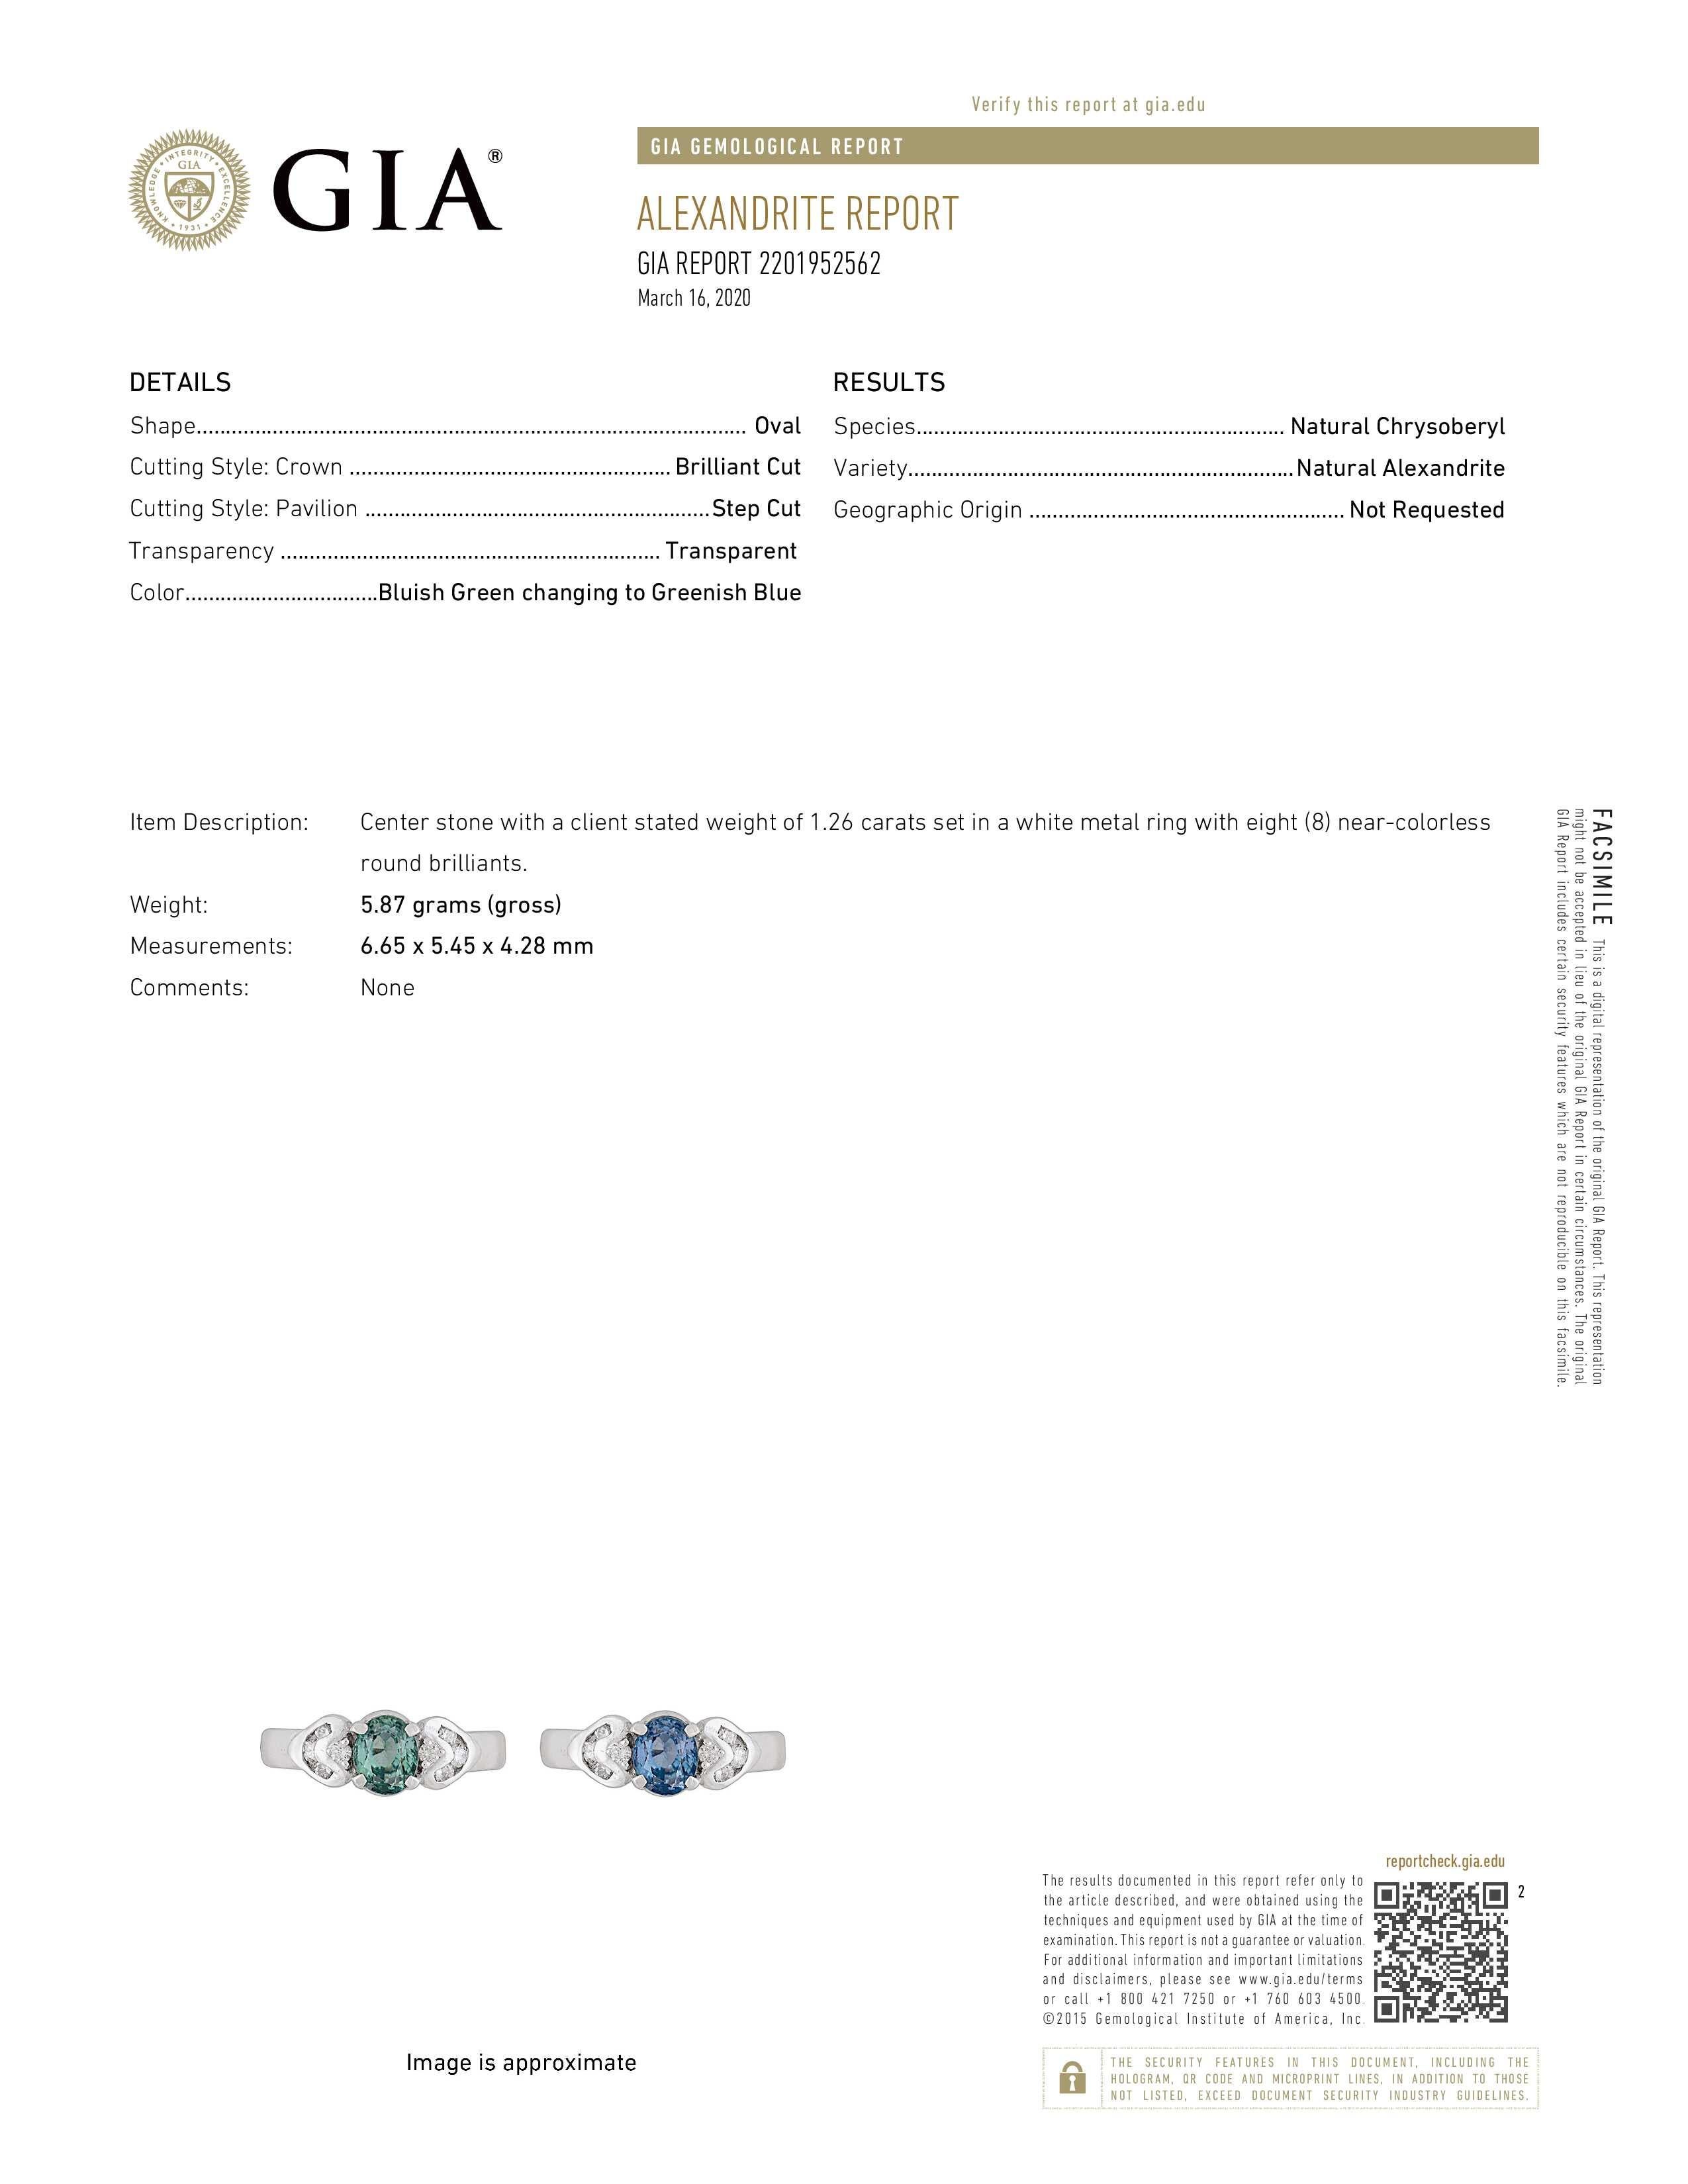 Women's Natural GIA Certified 1.26 Ct Alexandrite & Diamond Cocktail Ring For Sale